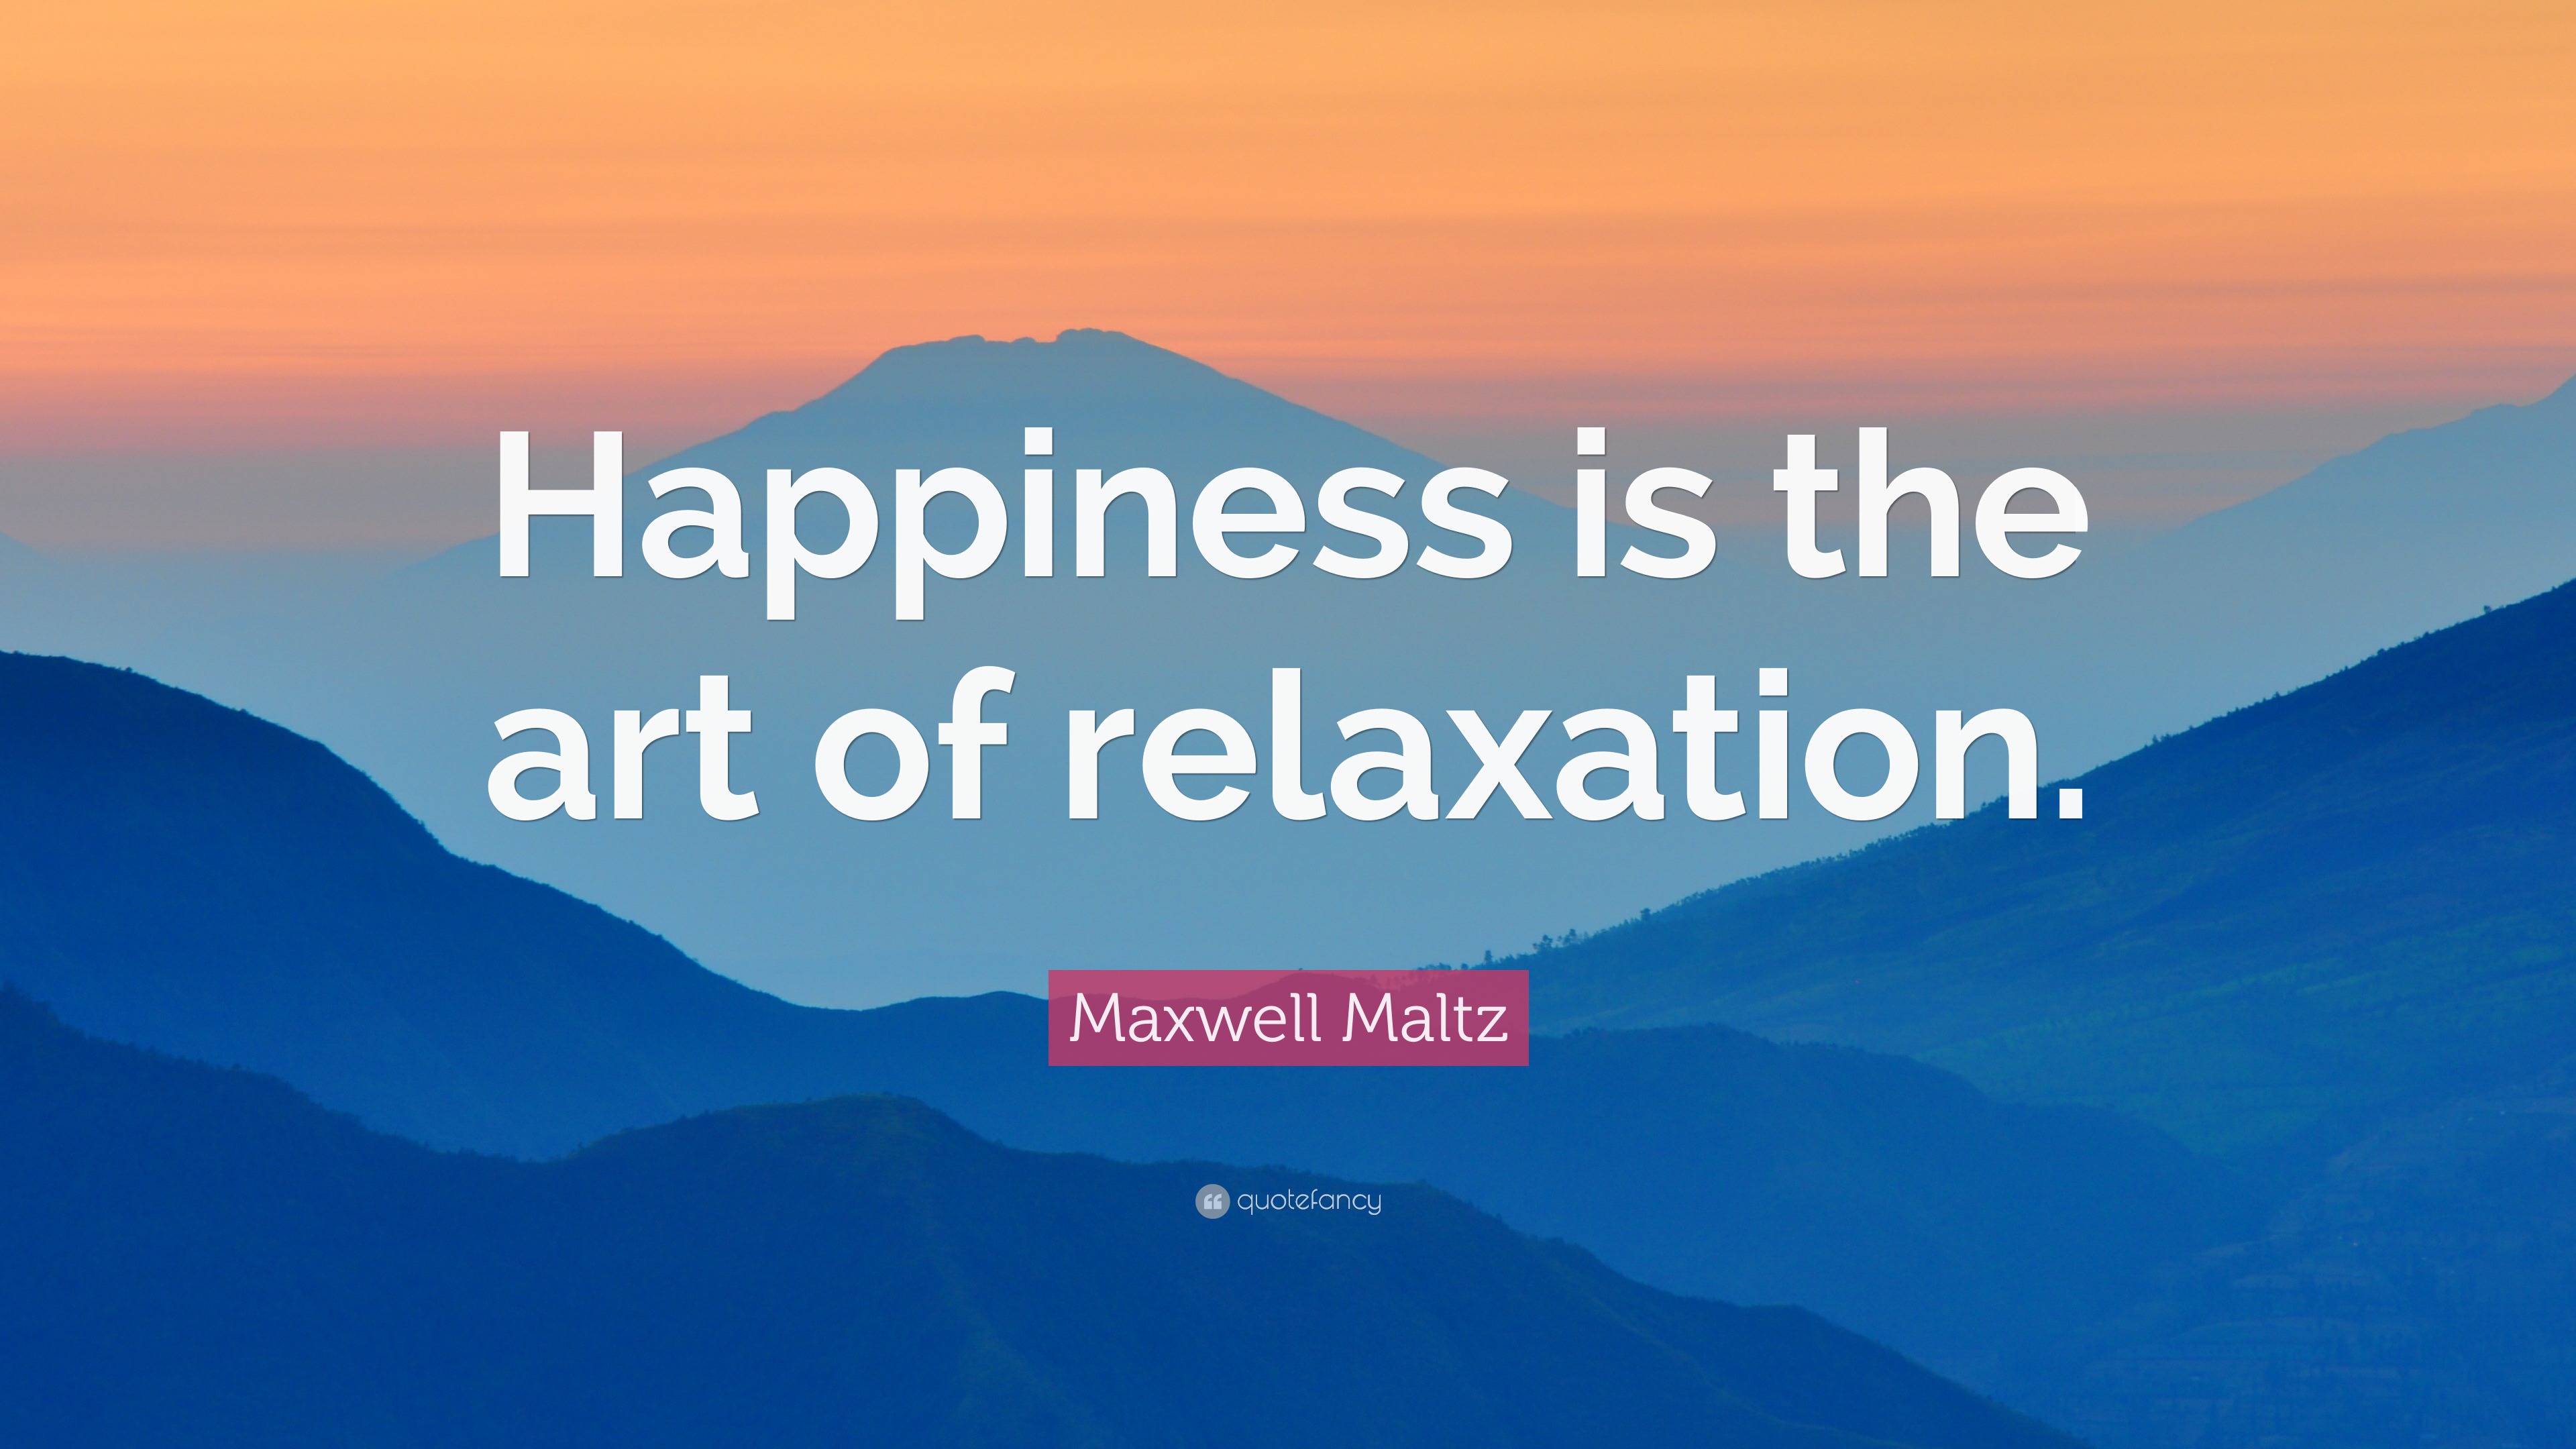 Maxwell Maltz Quote: “Happiness is the art of relaxation.”